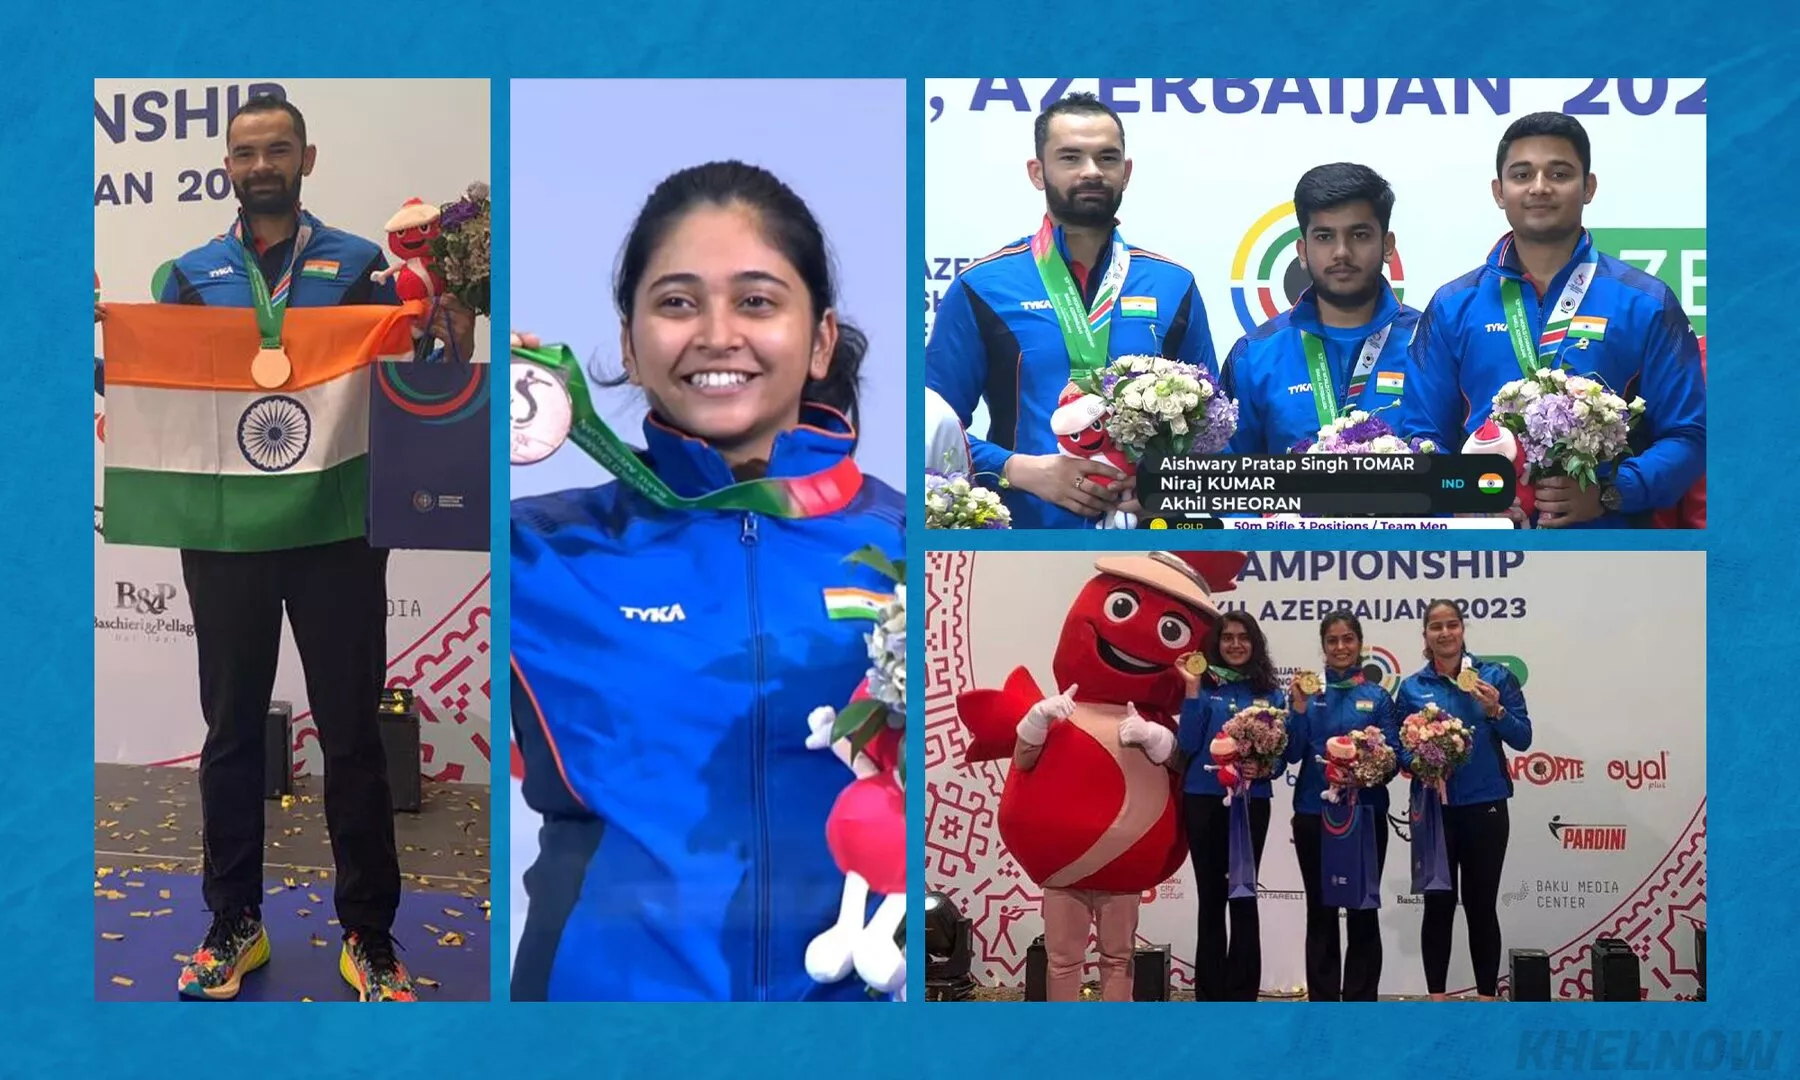 ISSF World Championships 2023 Indian medallists